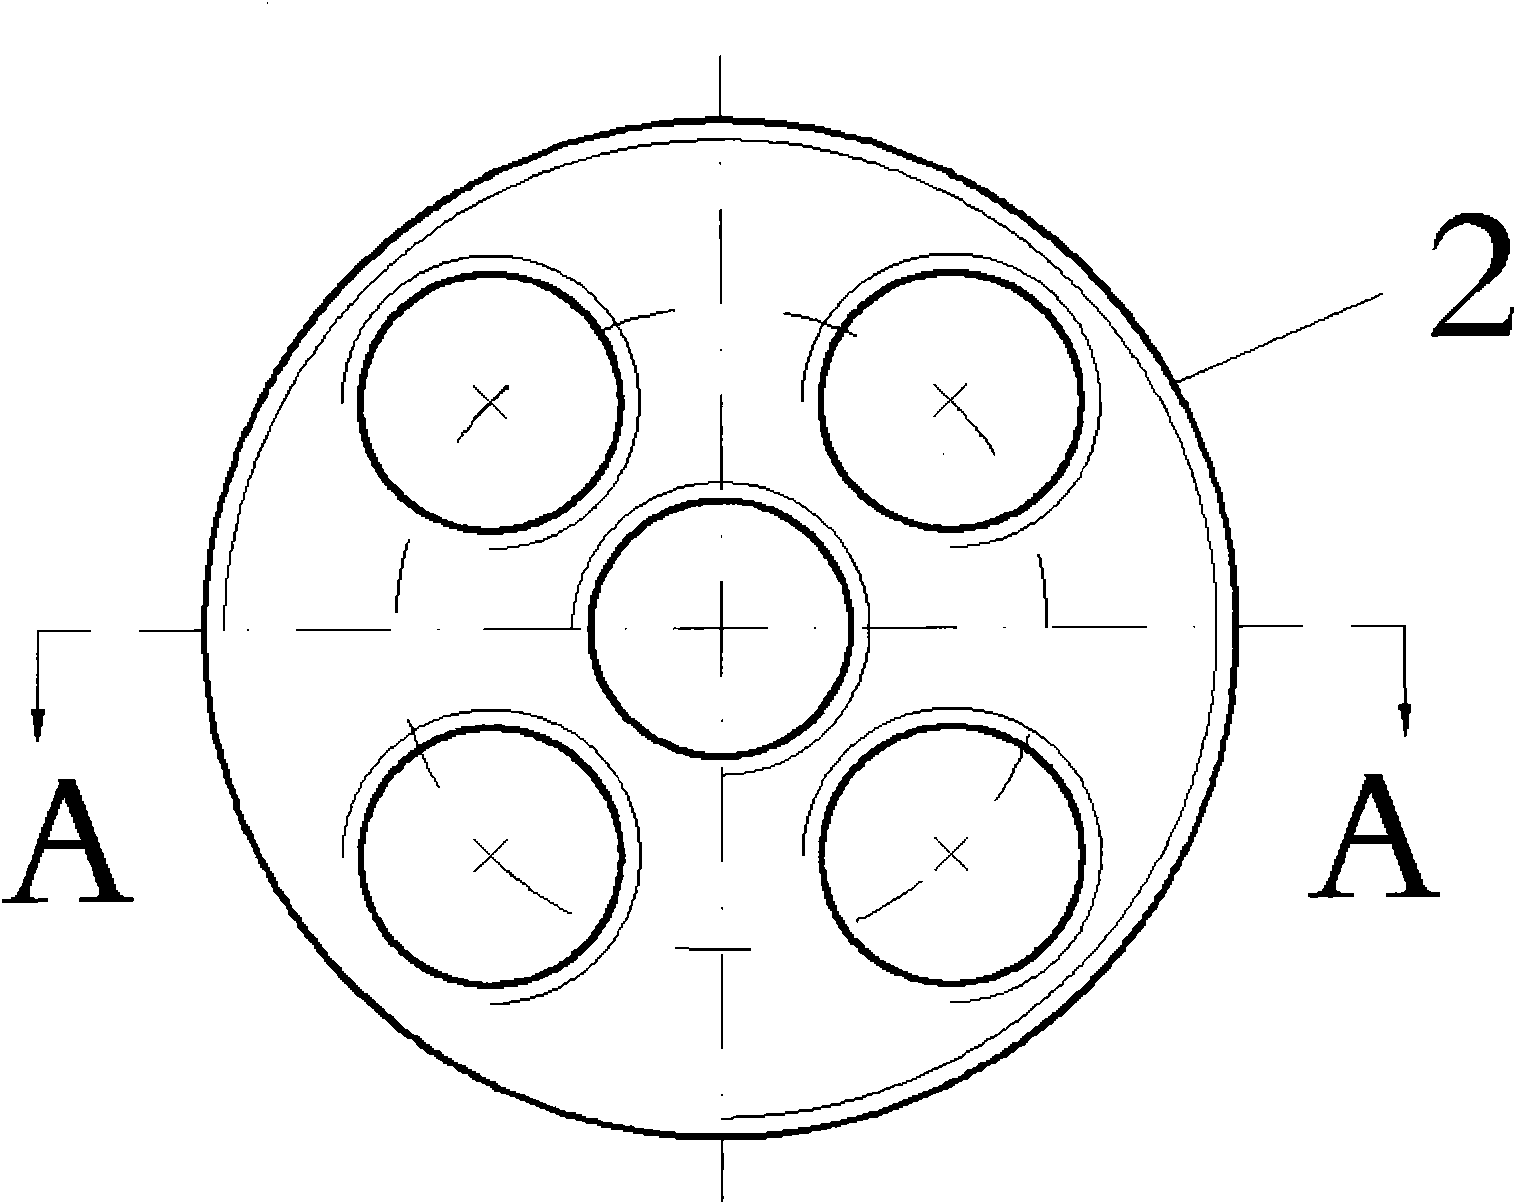 Jet injector with variable nozzle position